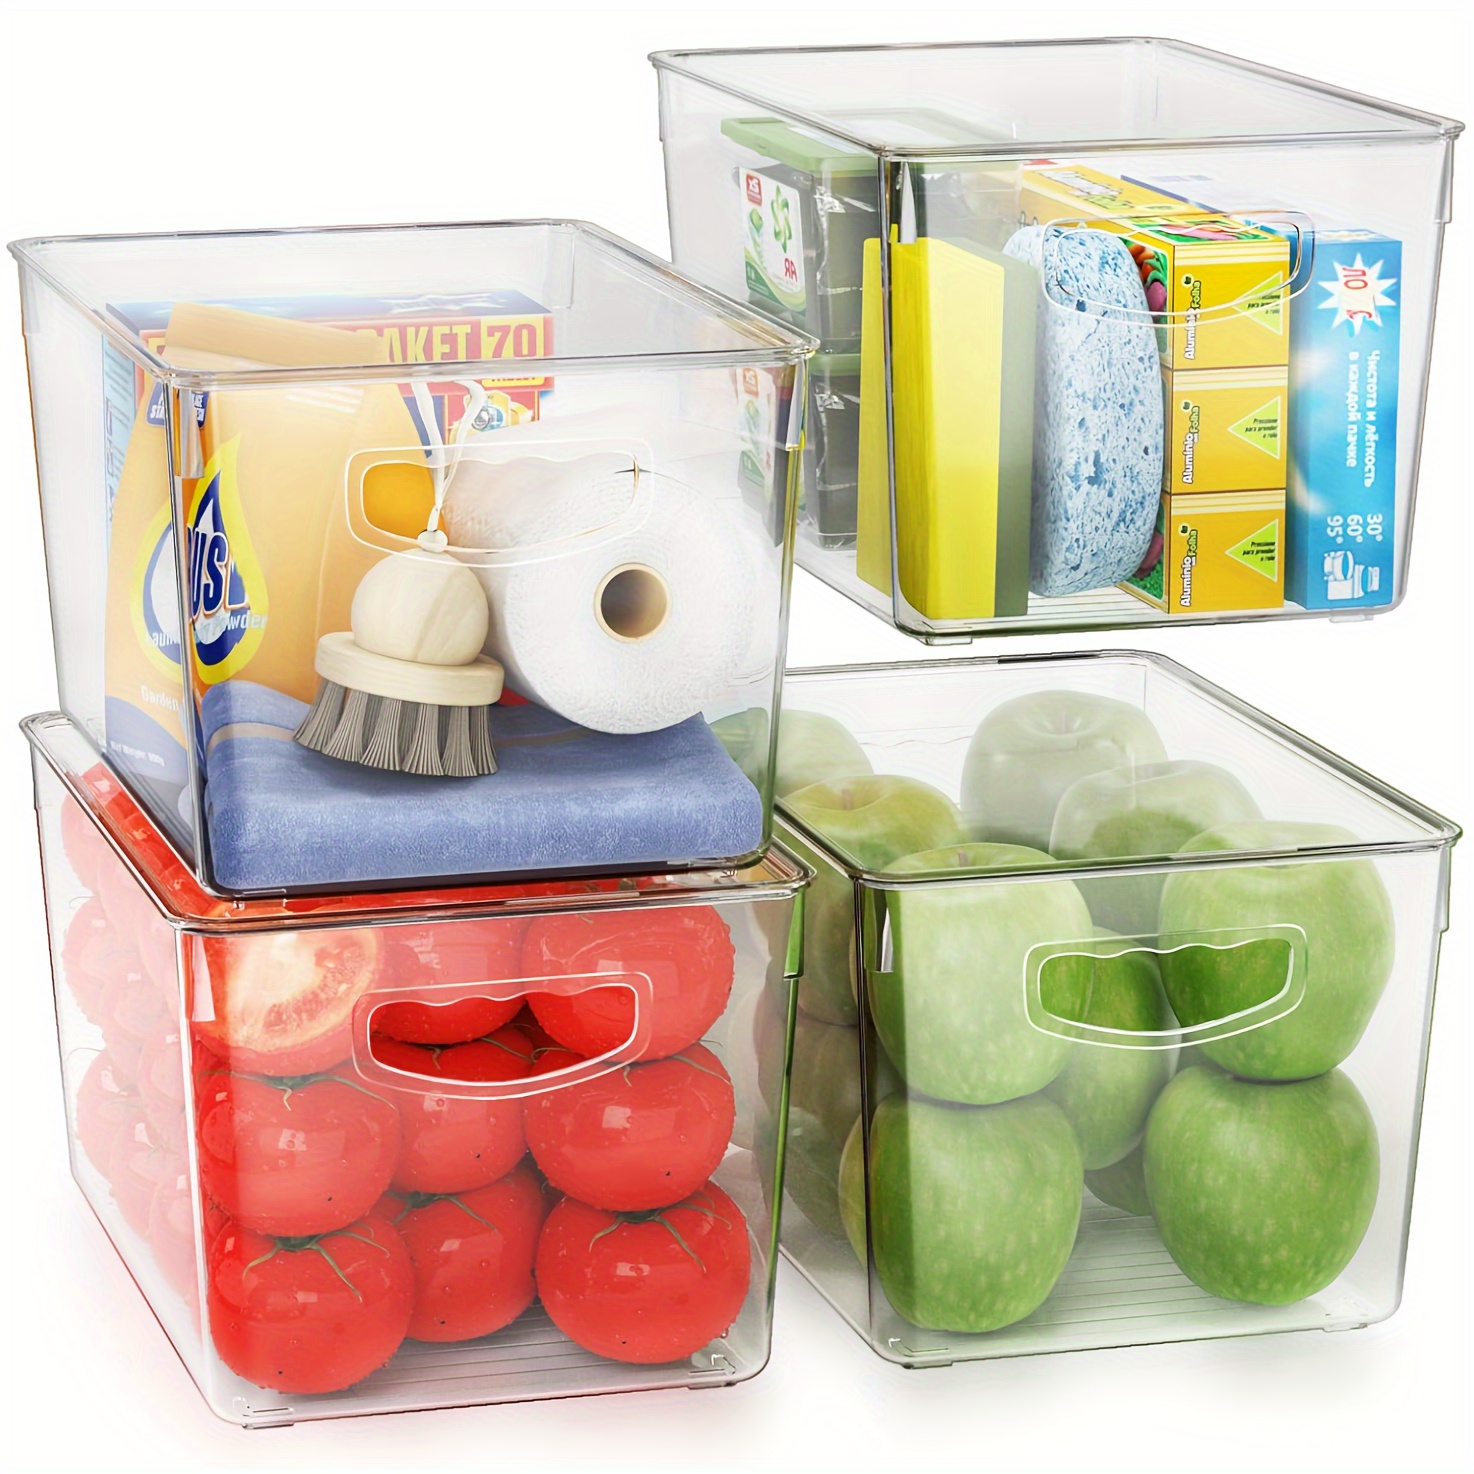 

4 Pack Clear Storage Bins With Lids Stackable, Large Plastic Storage Bins With Handle For Pantry Organization And Storage, Perfect Containers For Fridge Organizer, Freezer, Kitchen, Cabinets, Bathroom